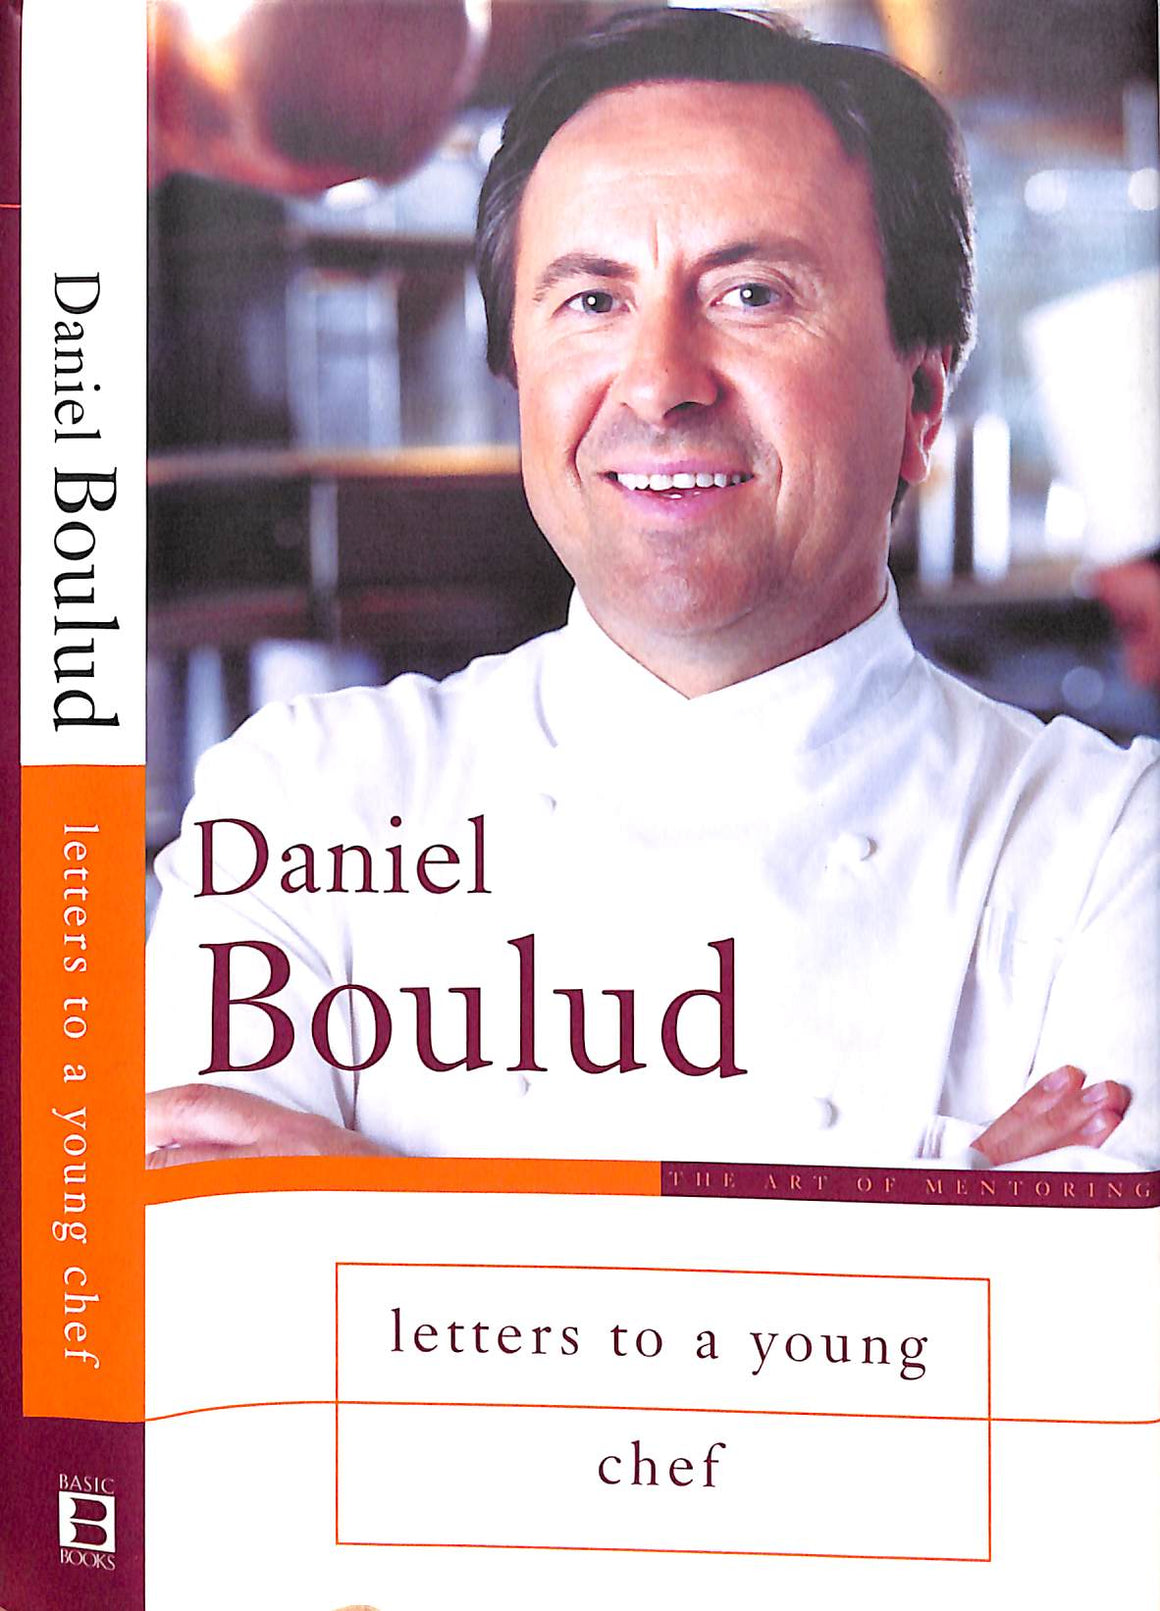 "Letters To A Young Chef" 2003 BOULUD, Daniel (SIGNED)